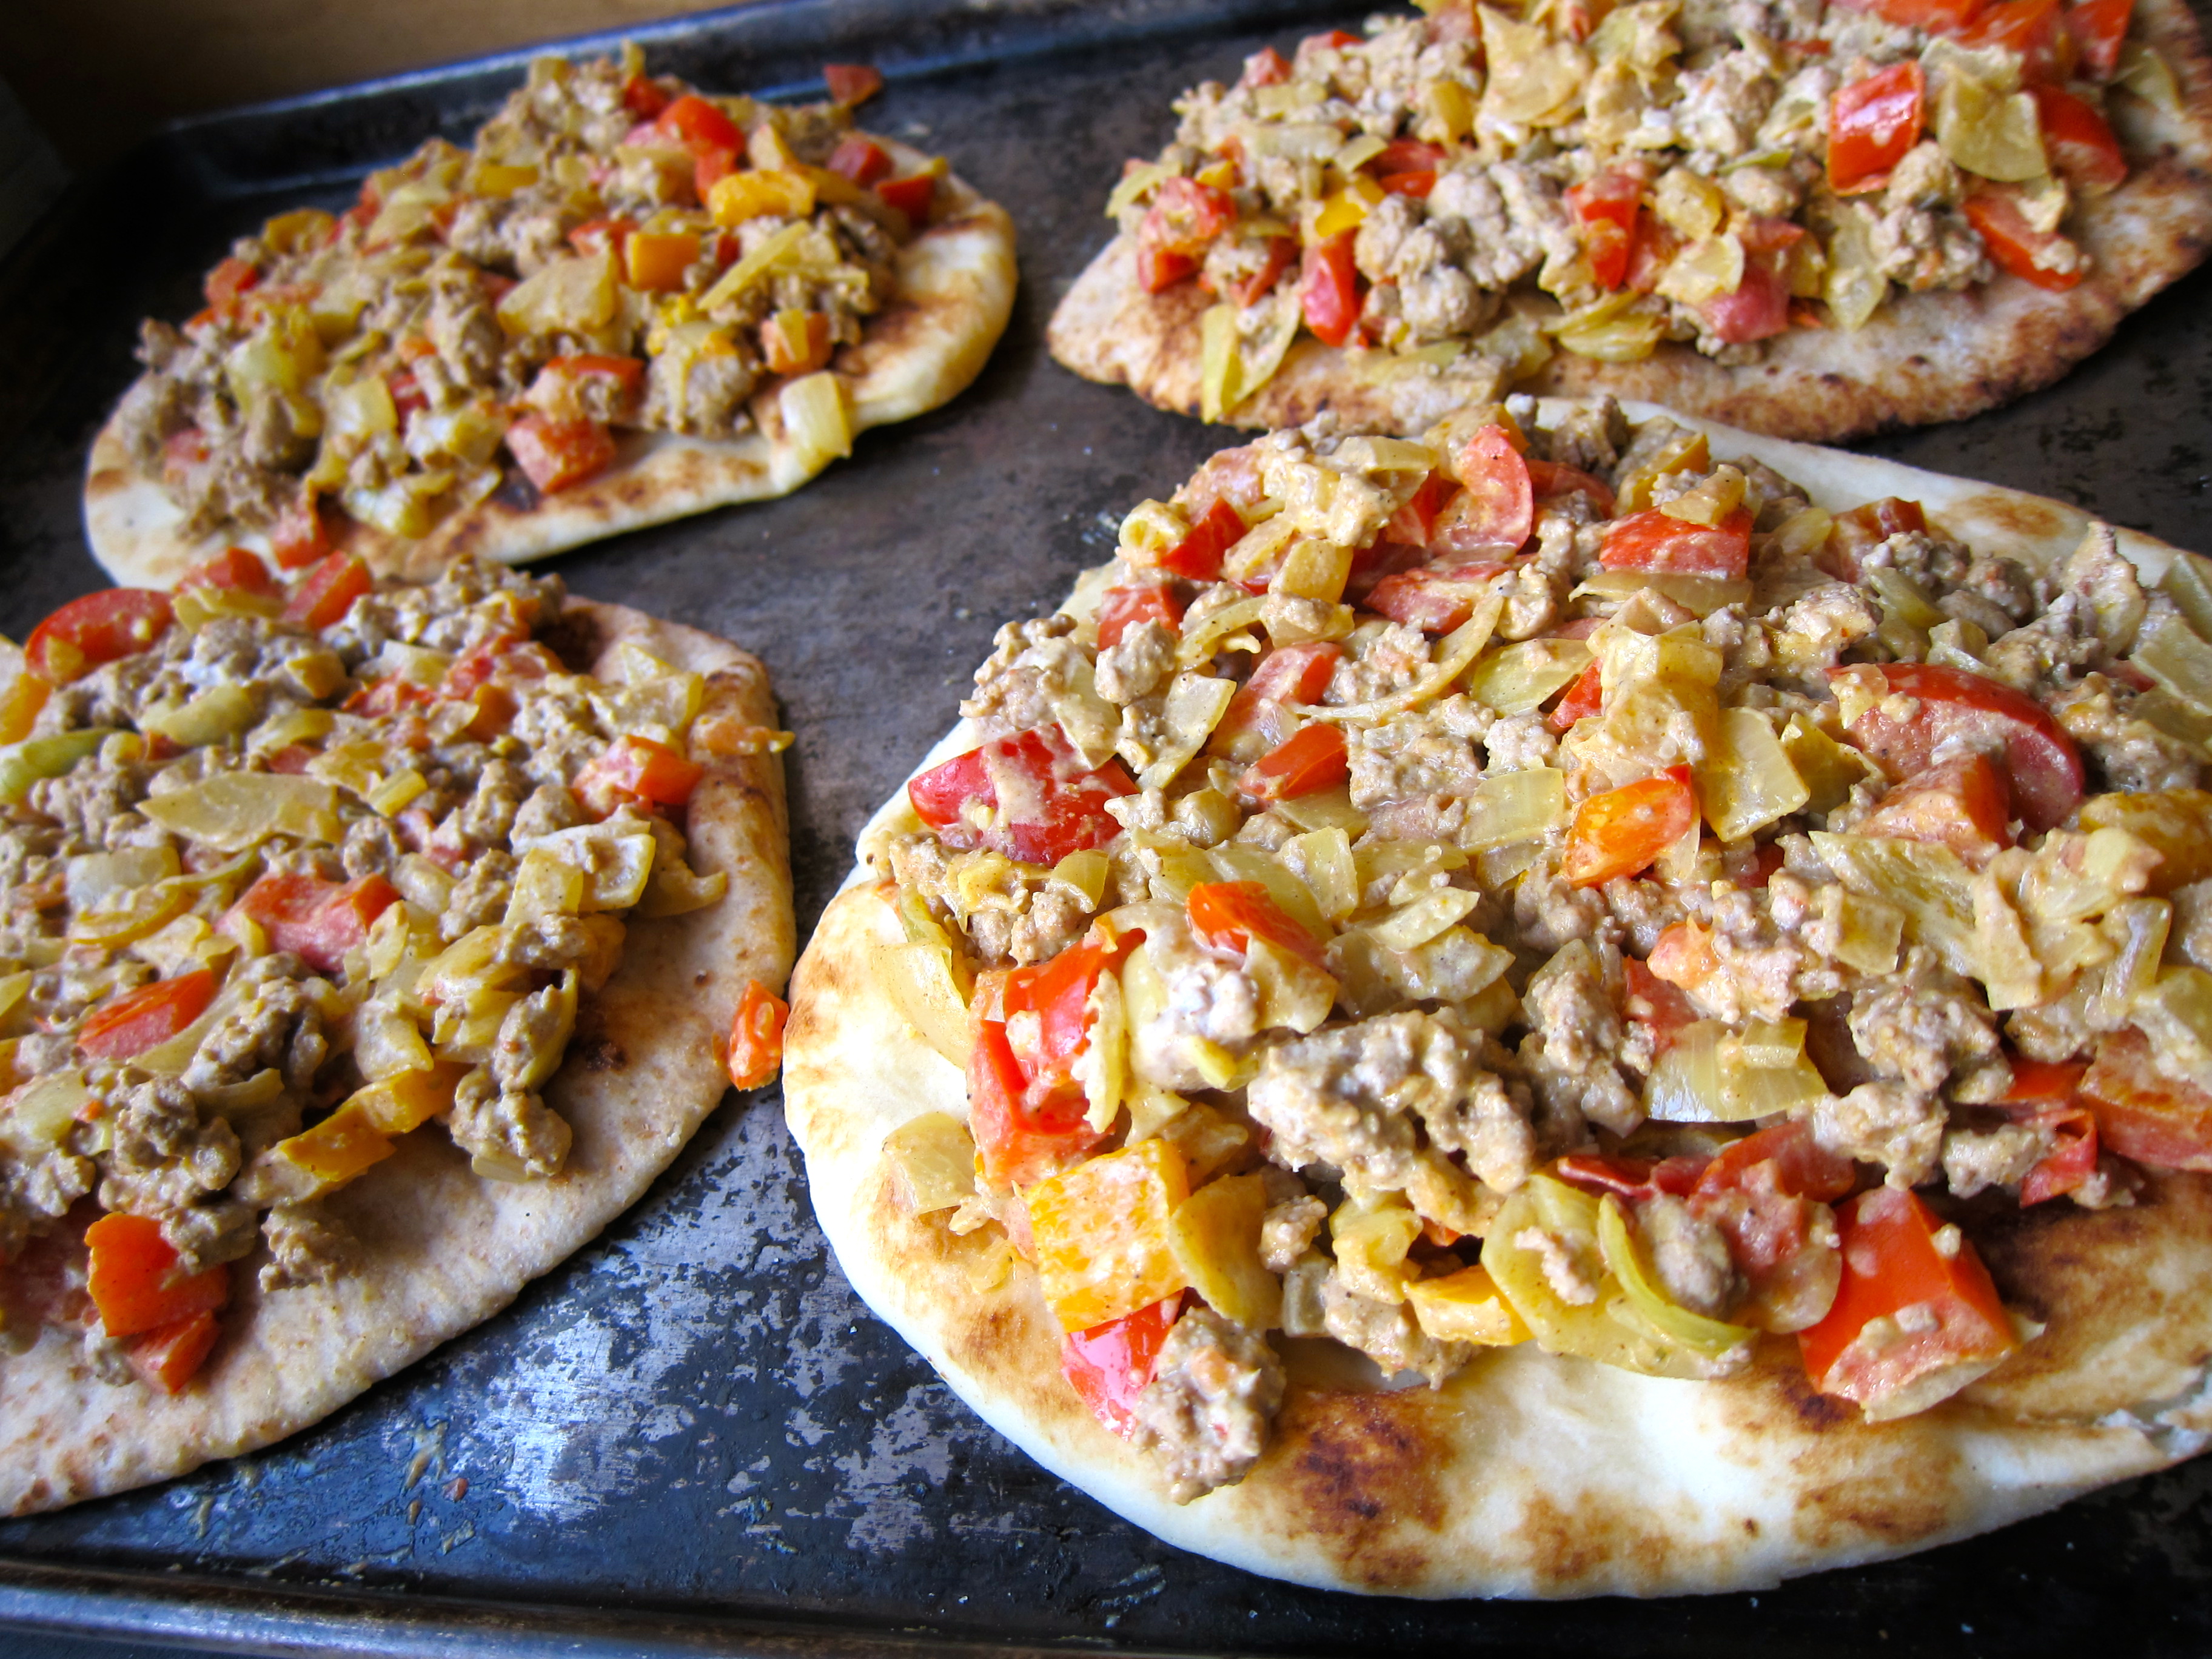 Turkey curry naan pizza